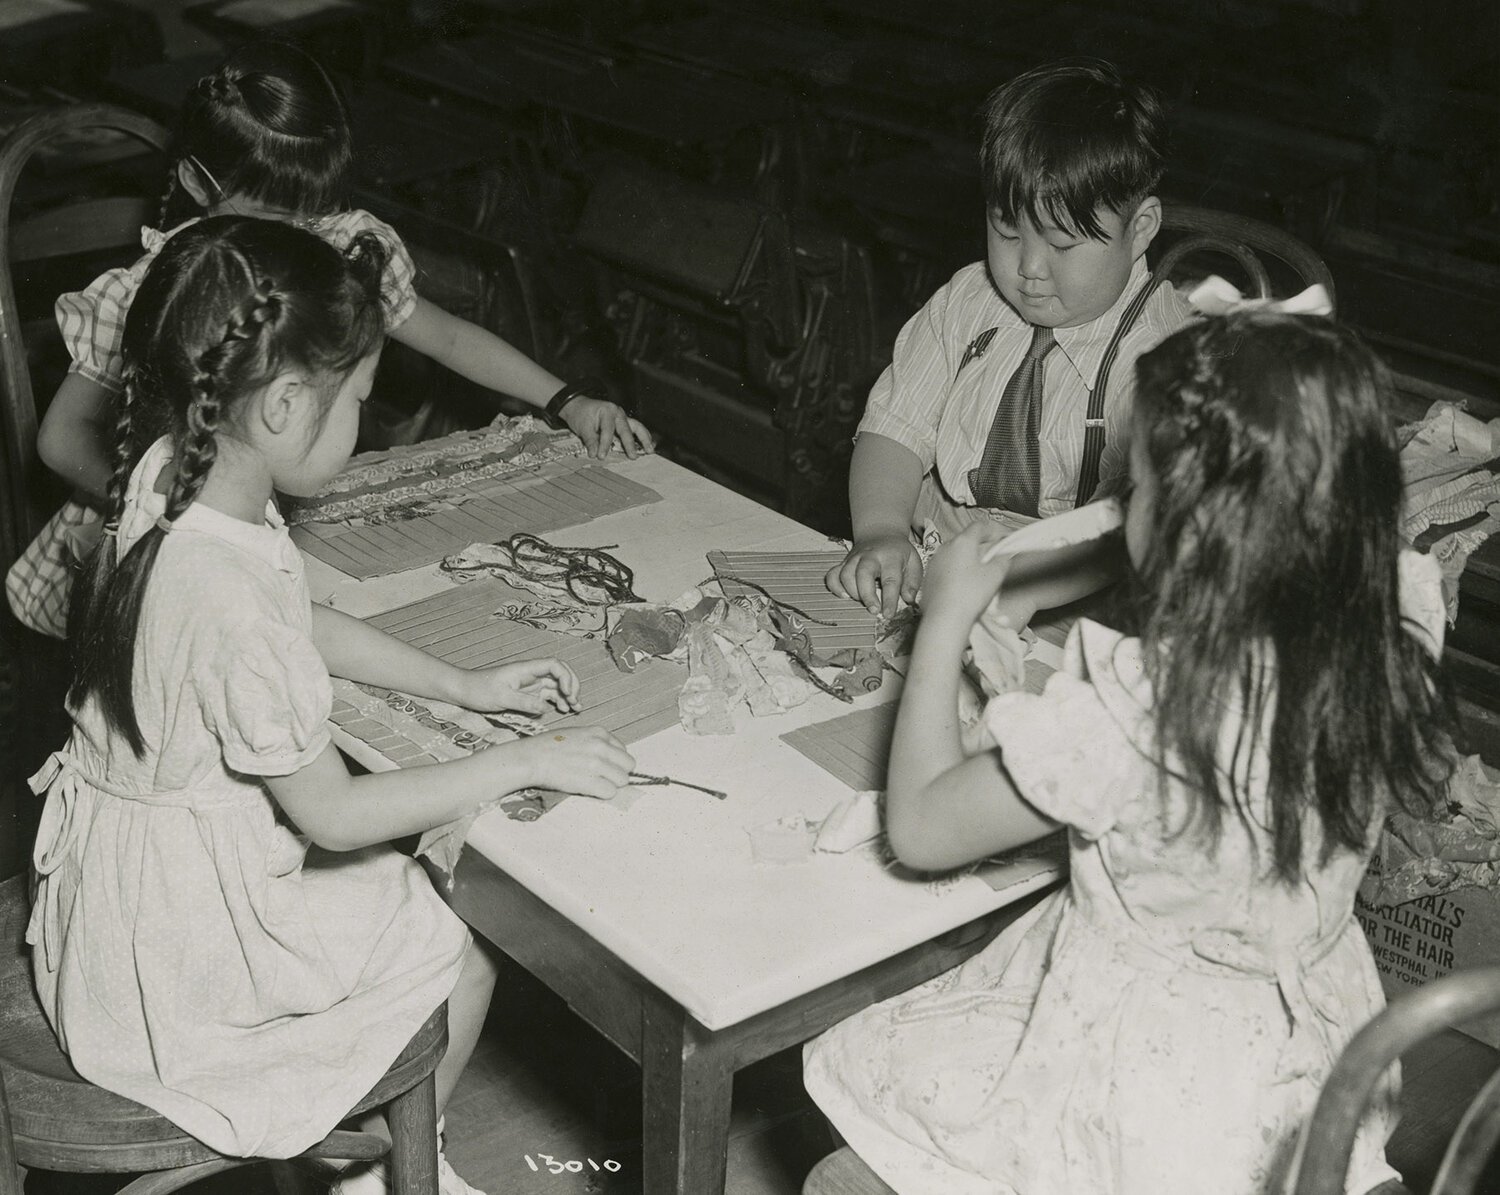 Arts and Crafts, PS 23, Manhattan, June 11, 1947. BOE 13010, NYC Board of Education Collection, NYC Municipal Archives.